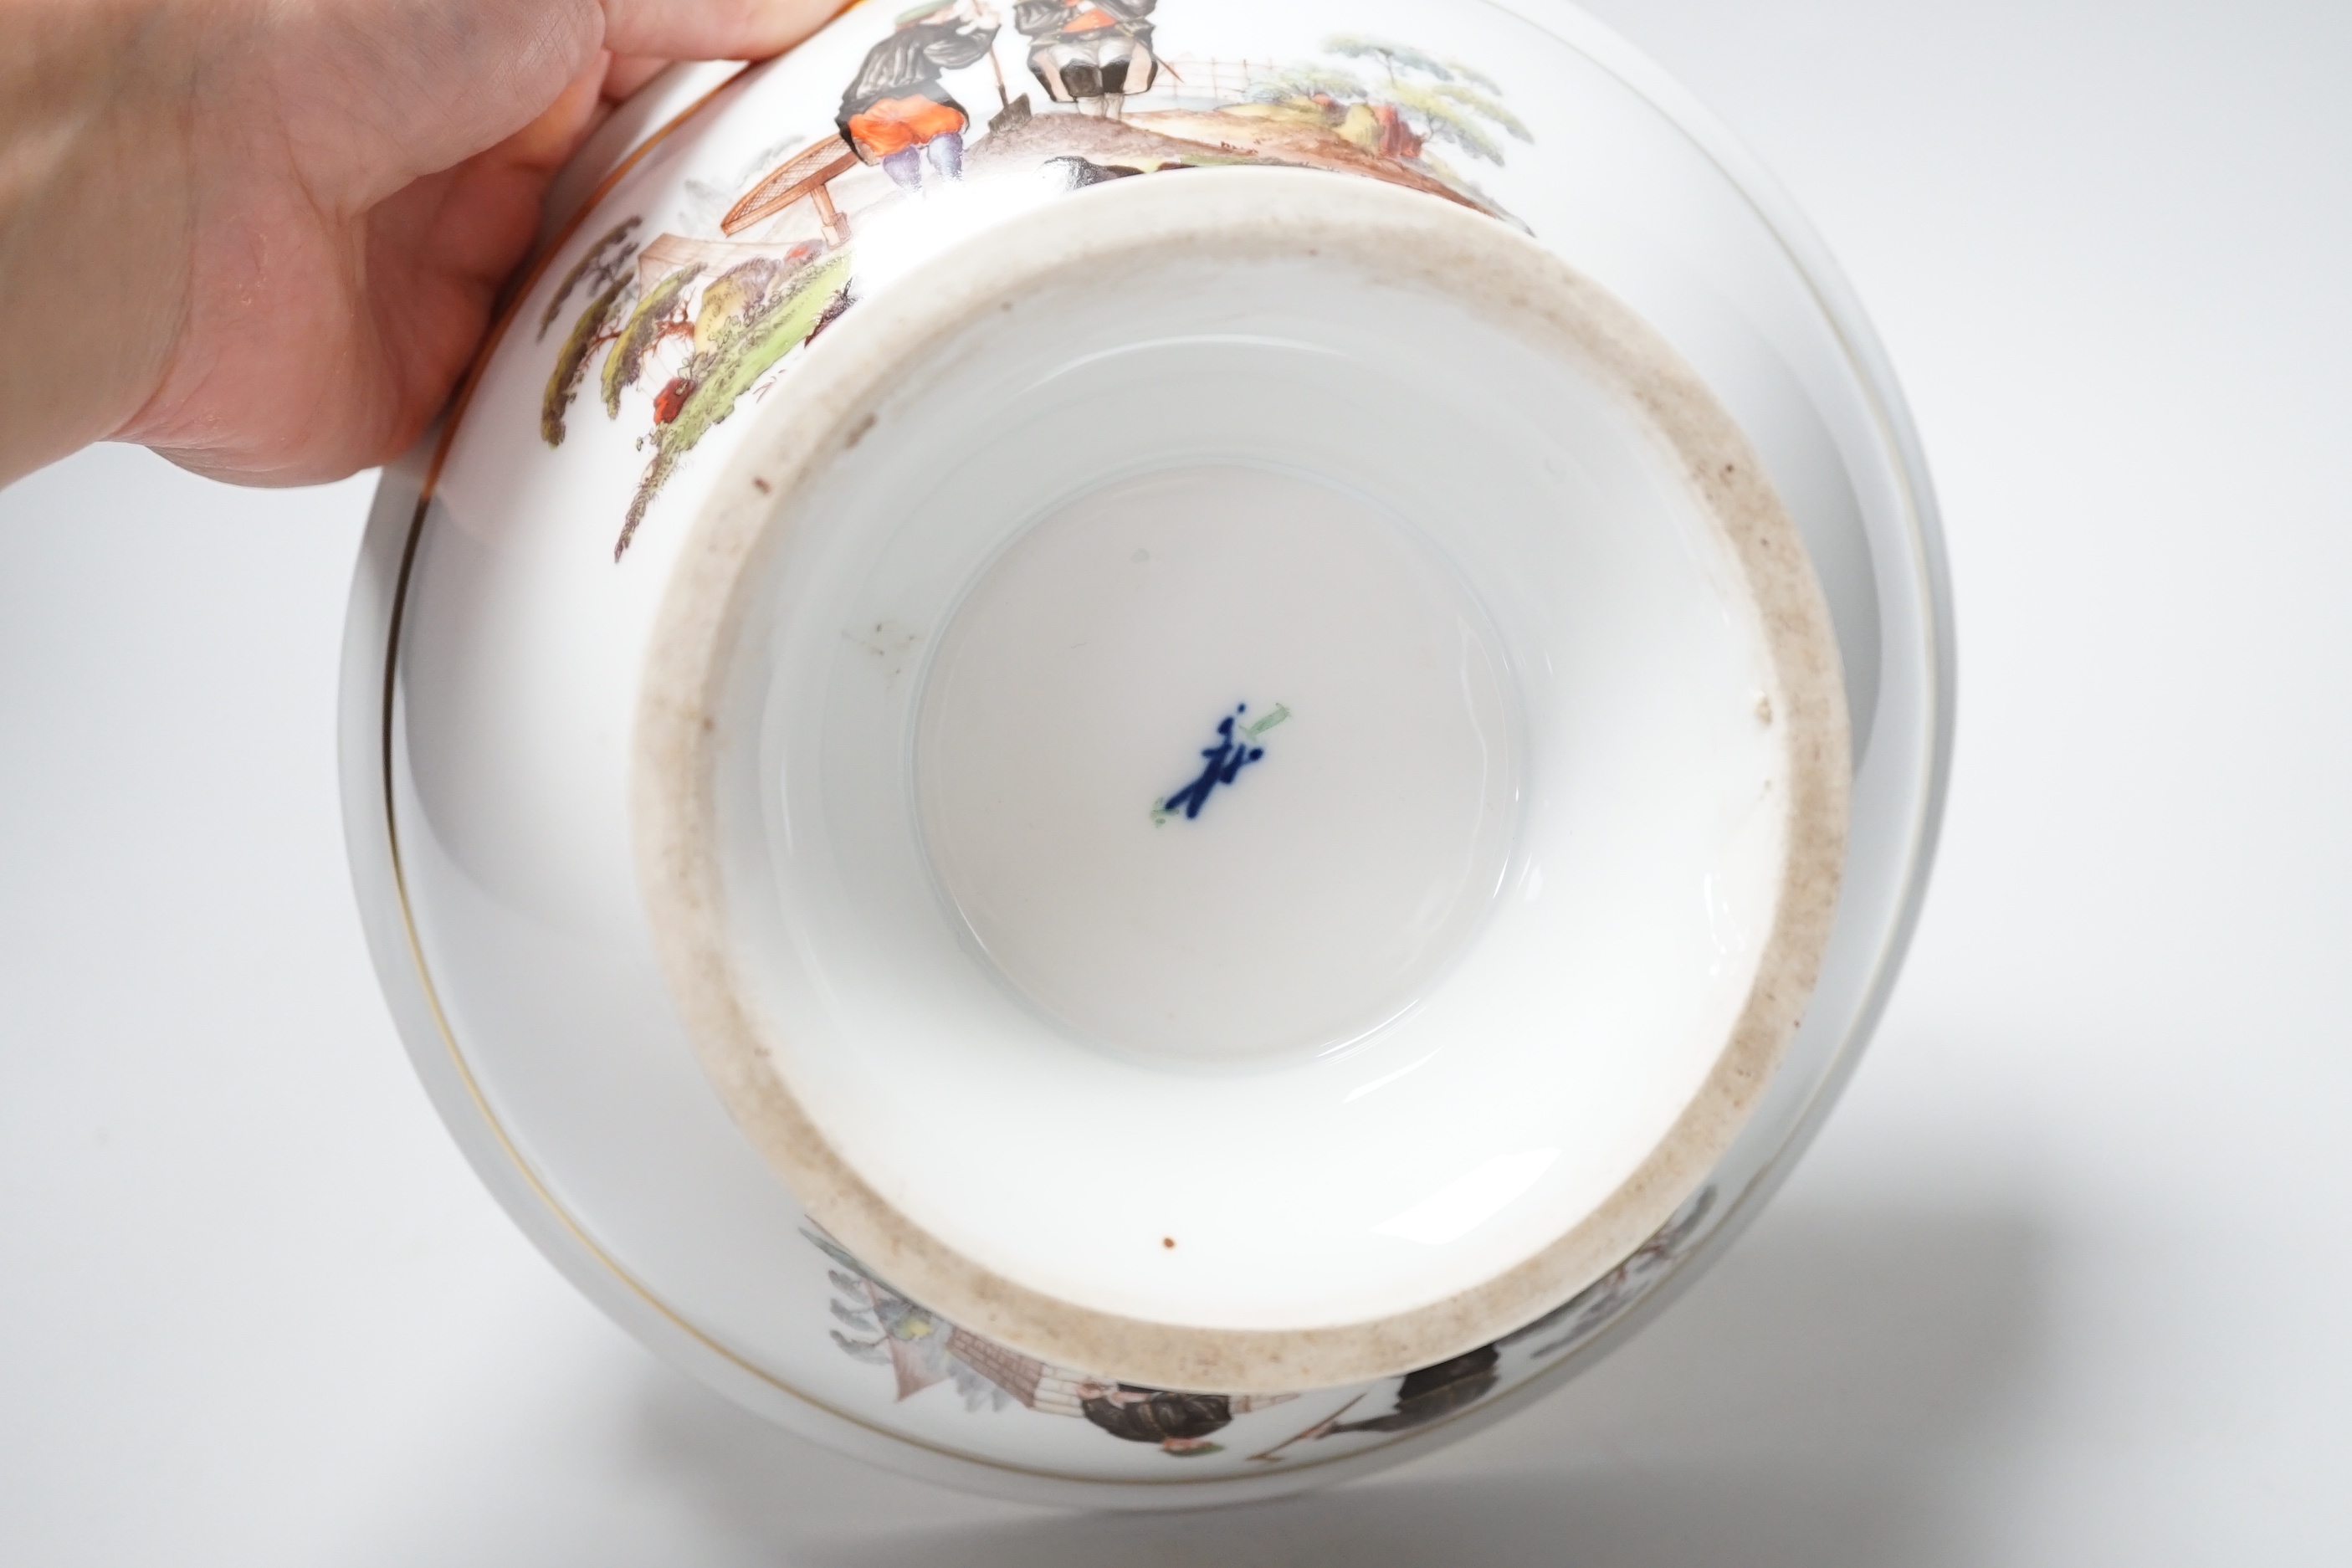 A Meissen footed ‘Miners’ bowl, special mark for 1814-15, 22cm diameter